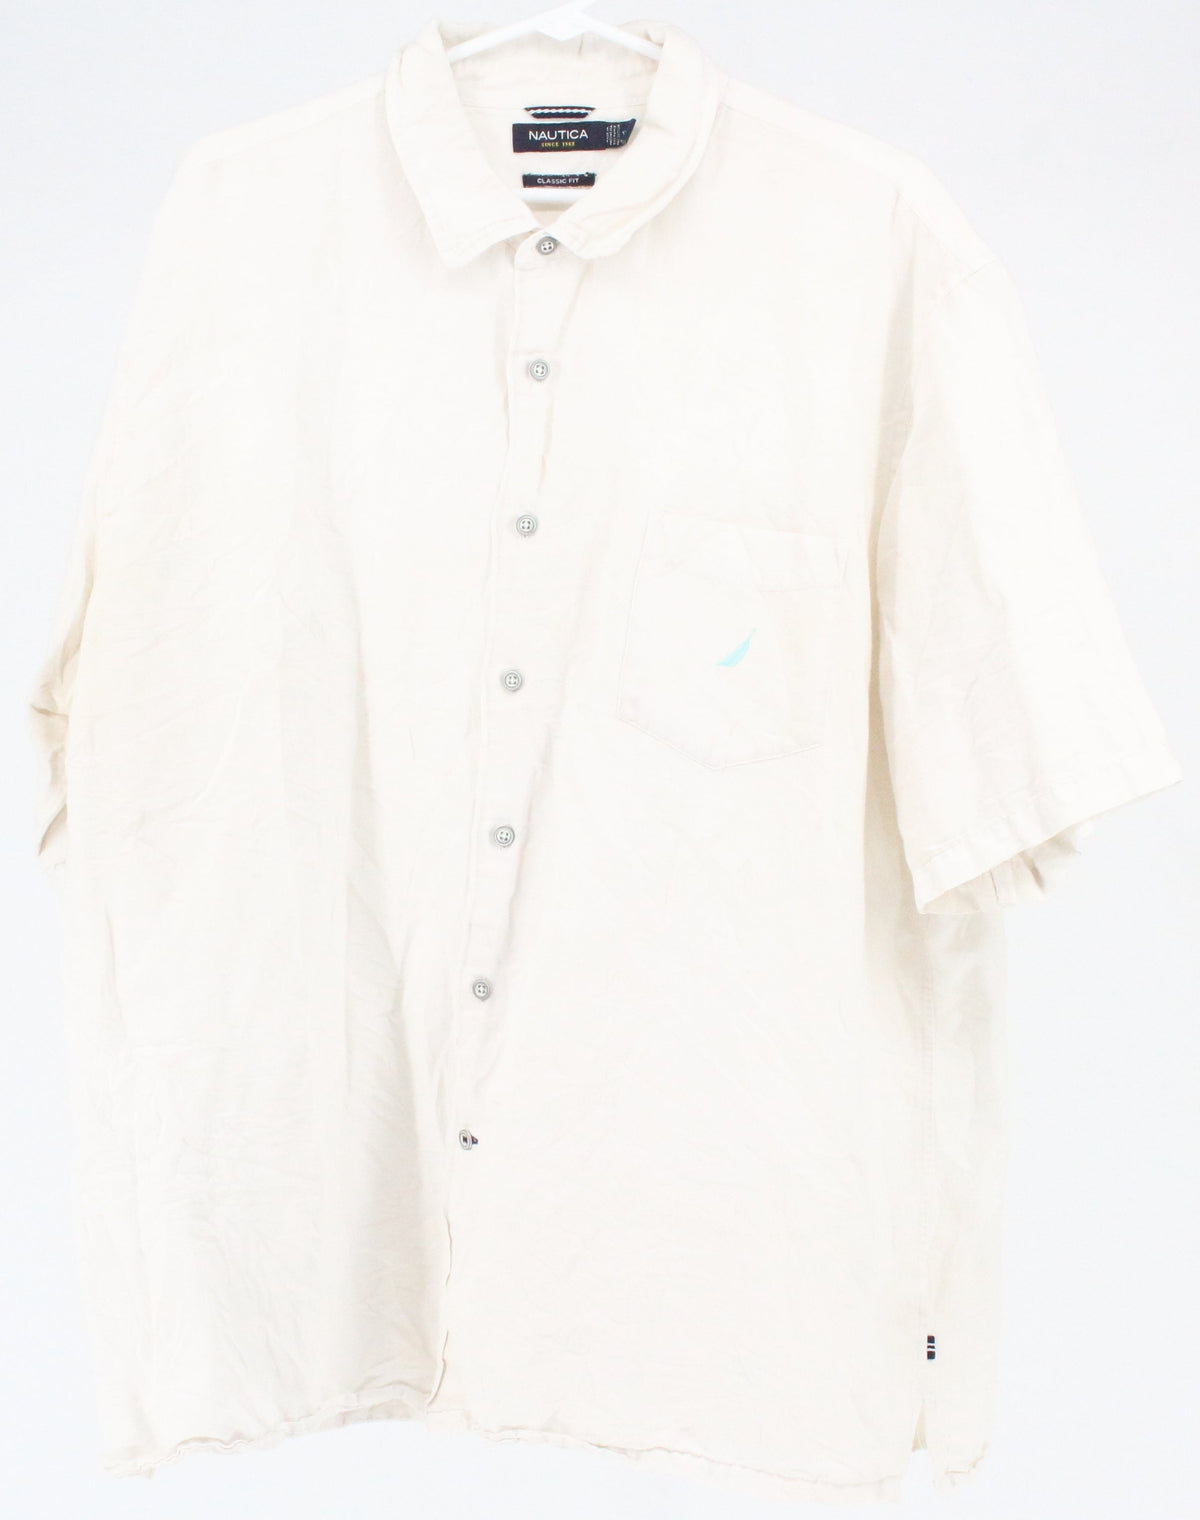 Nautica Classic Fit White Button-Up Short Sleeve Shirt